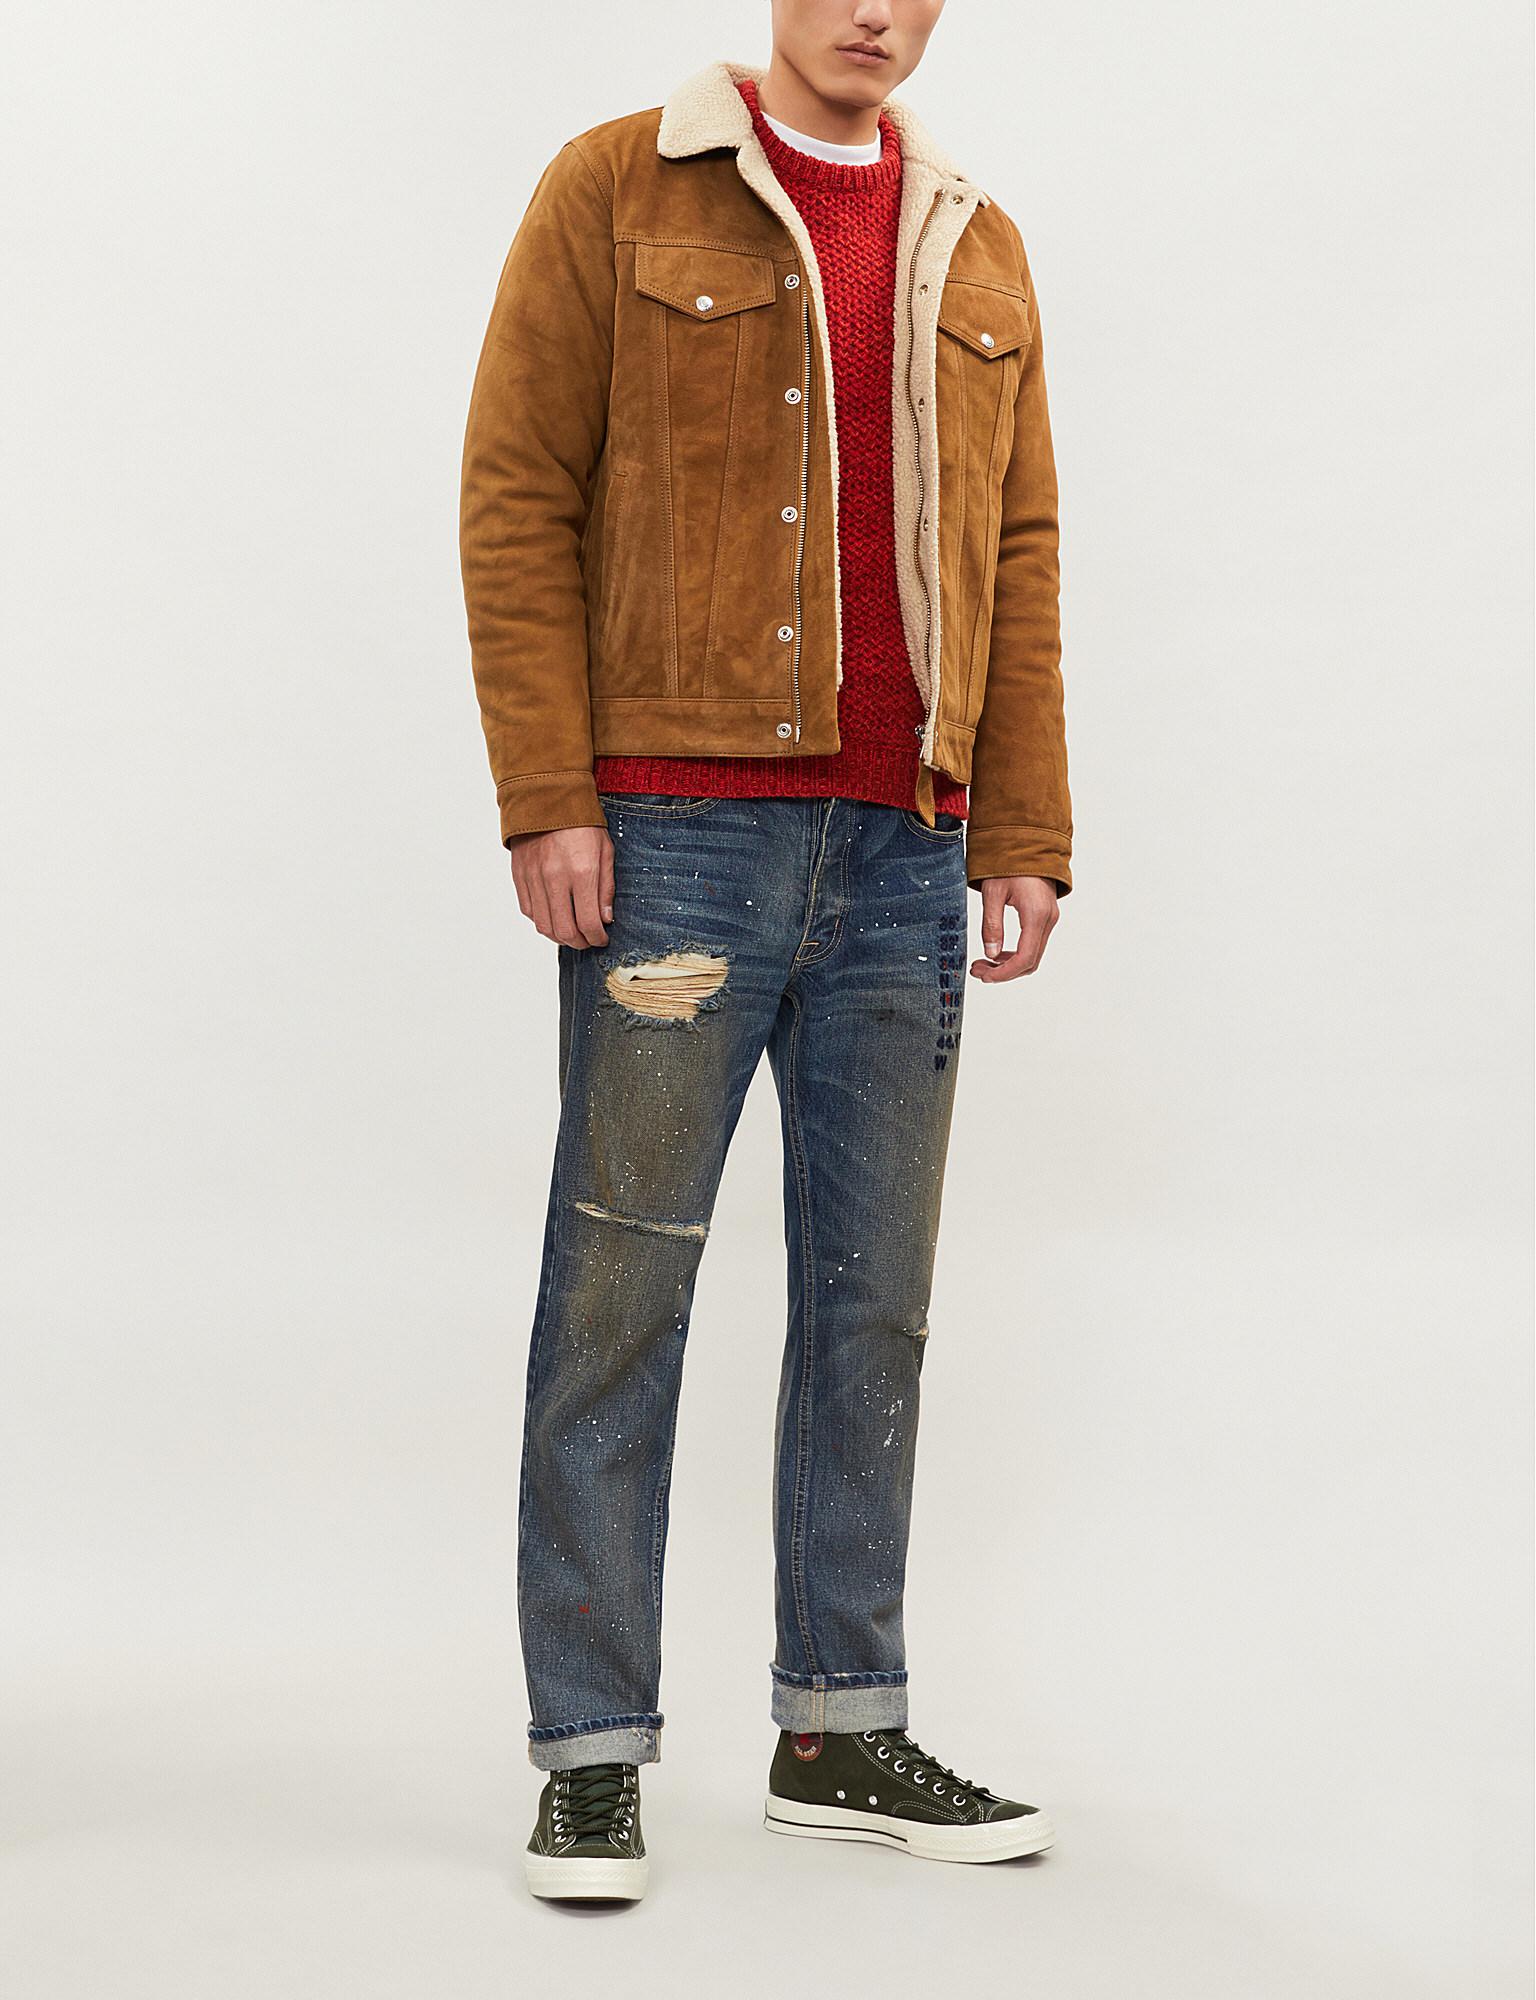 Lyst - Schott Nyc Suede And Shearling Trucker Jacket in Blue for Men